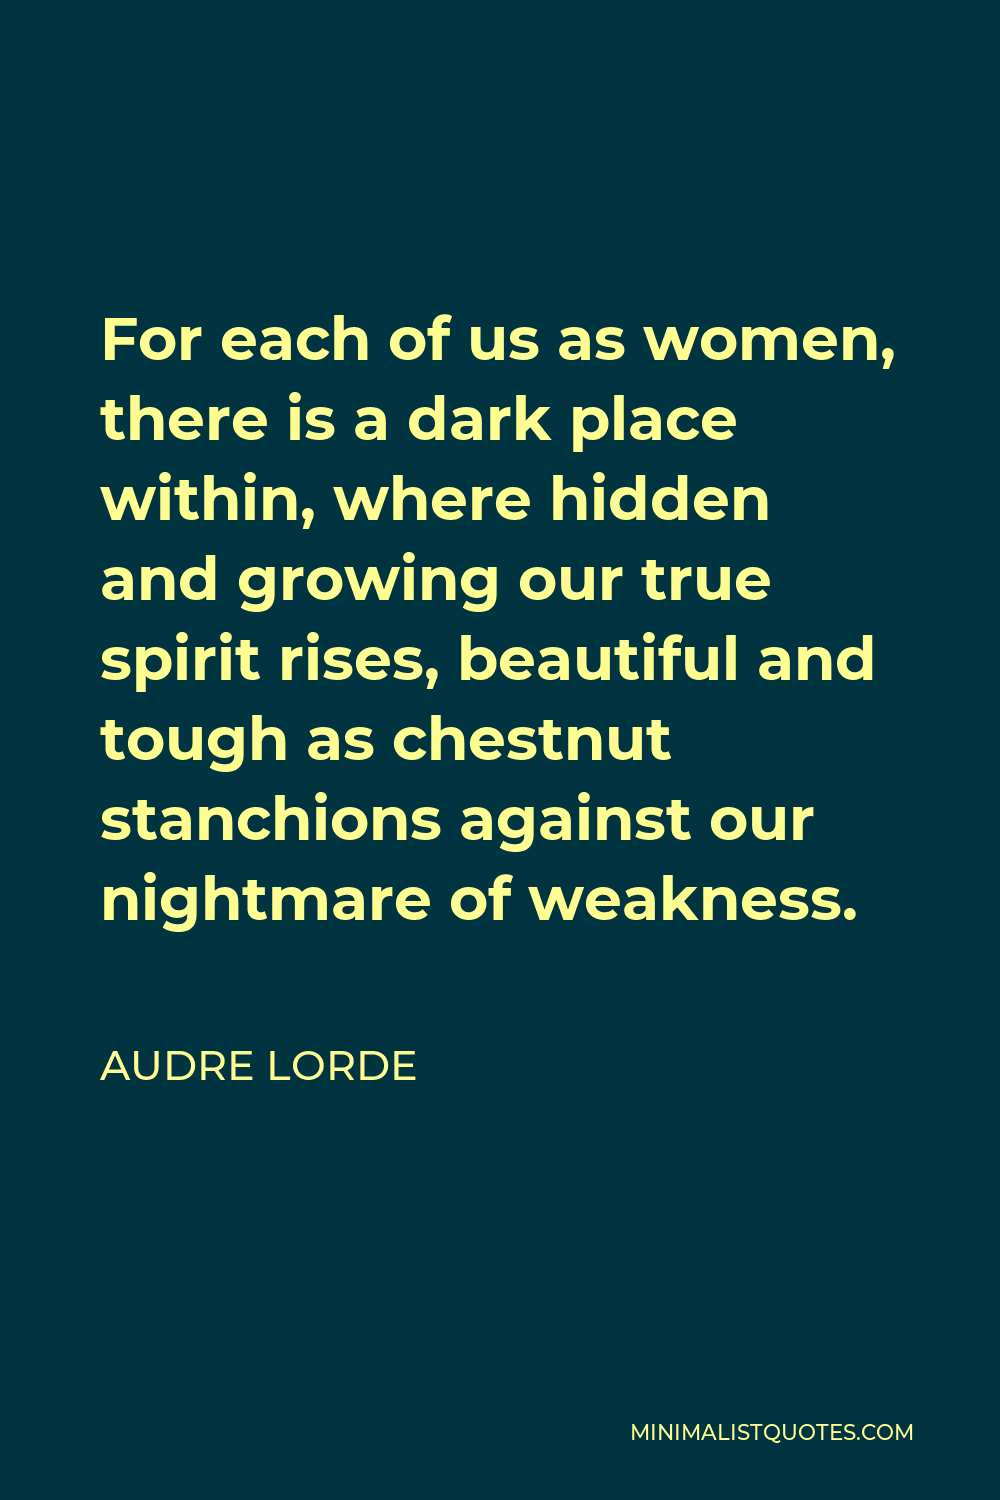 Audre Lorde Quote - For each of us as women, there is a dark place within, where hidden and growing our true spirit rises, beautiful and tough as chestnut stanchions against our nightmare of weakness.